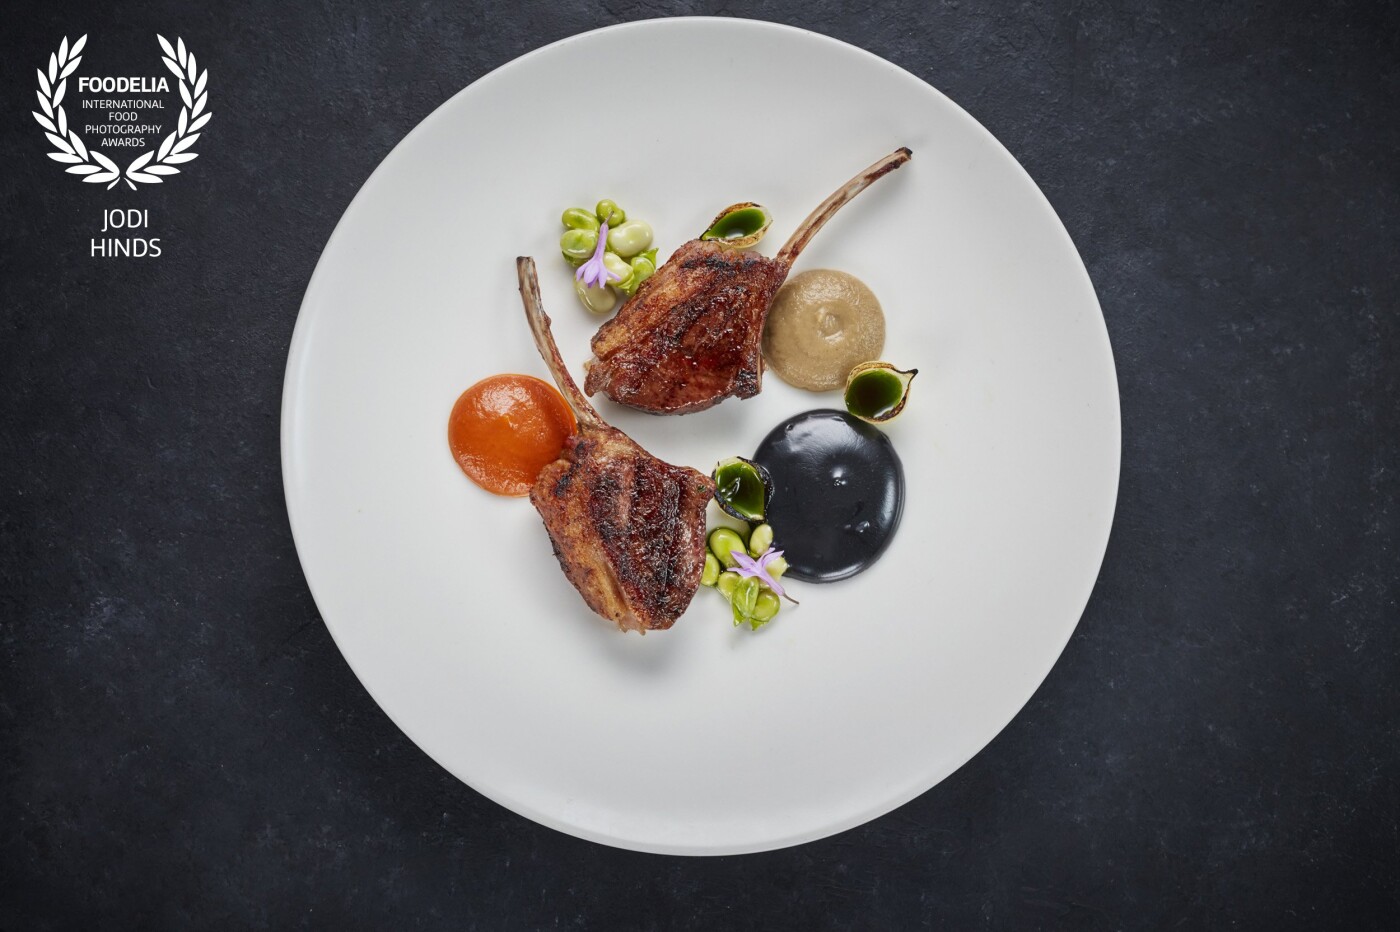 Wood smoked lamb cutlets with charcoal mayonnaise, burnt aubergine, tomato & red pepper ketchup from the talented @mikereidchef at @mrestaurants_<br />
Beautifully simple with incredible flavours!<br />
Thank you so much for the award!<br />
@jodihindsphoto